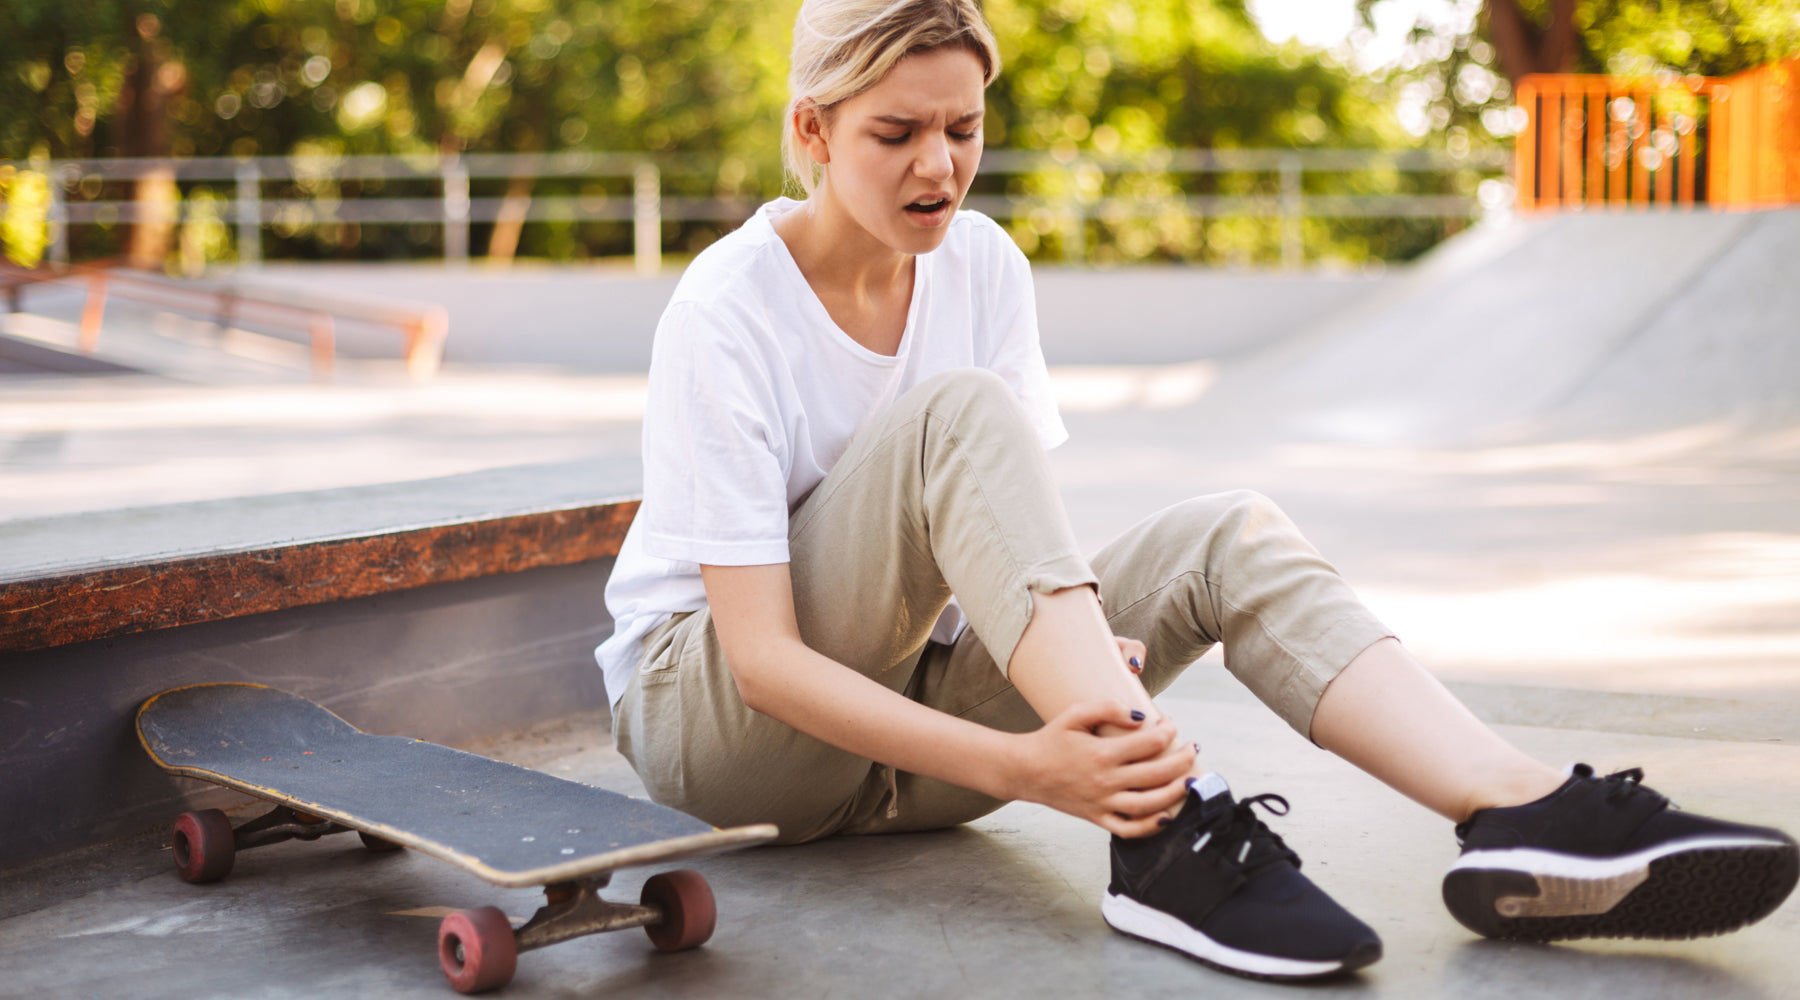 a-skateboarder-with-an-injured-ankle